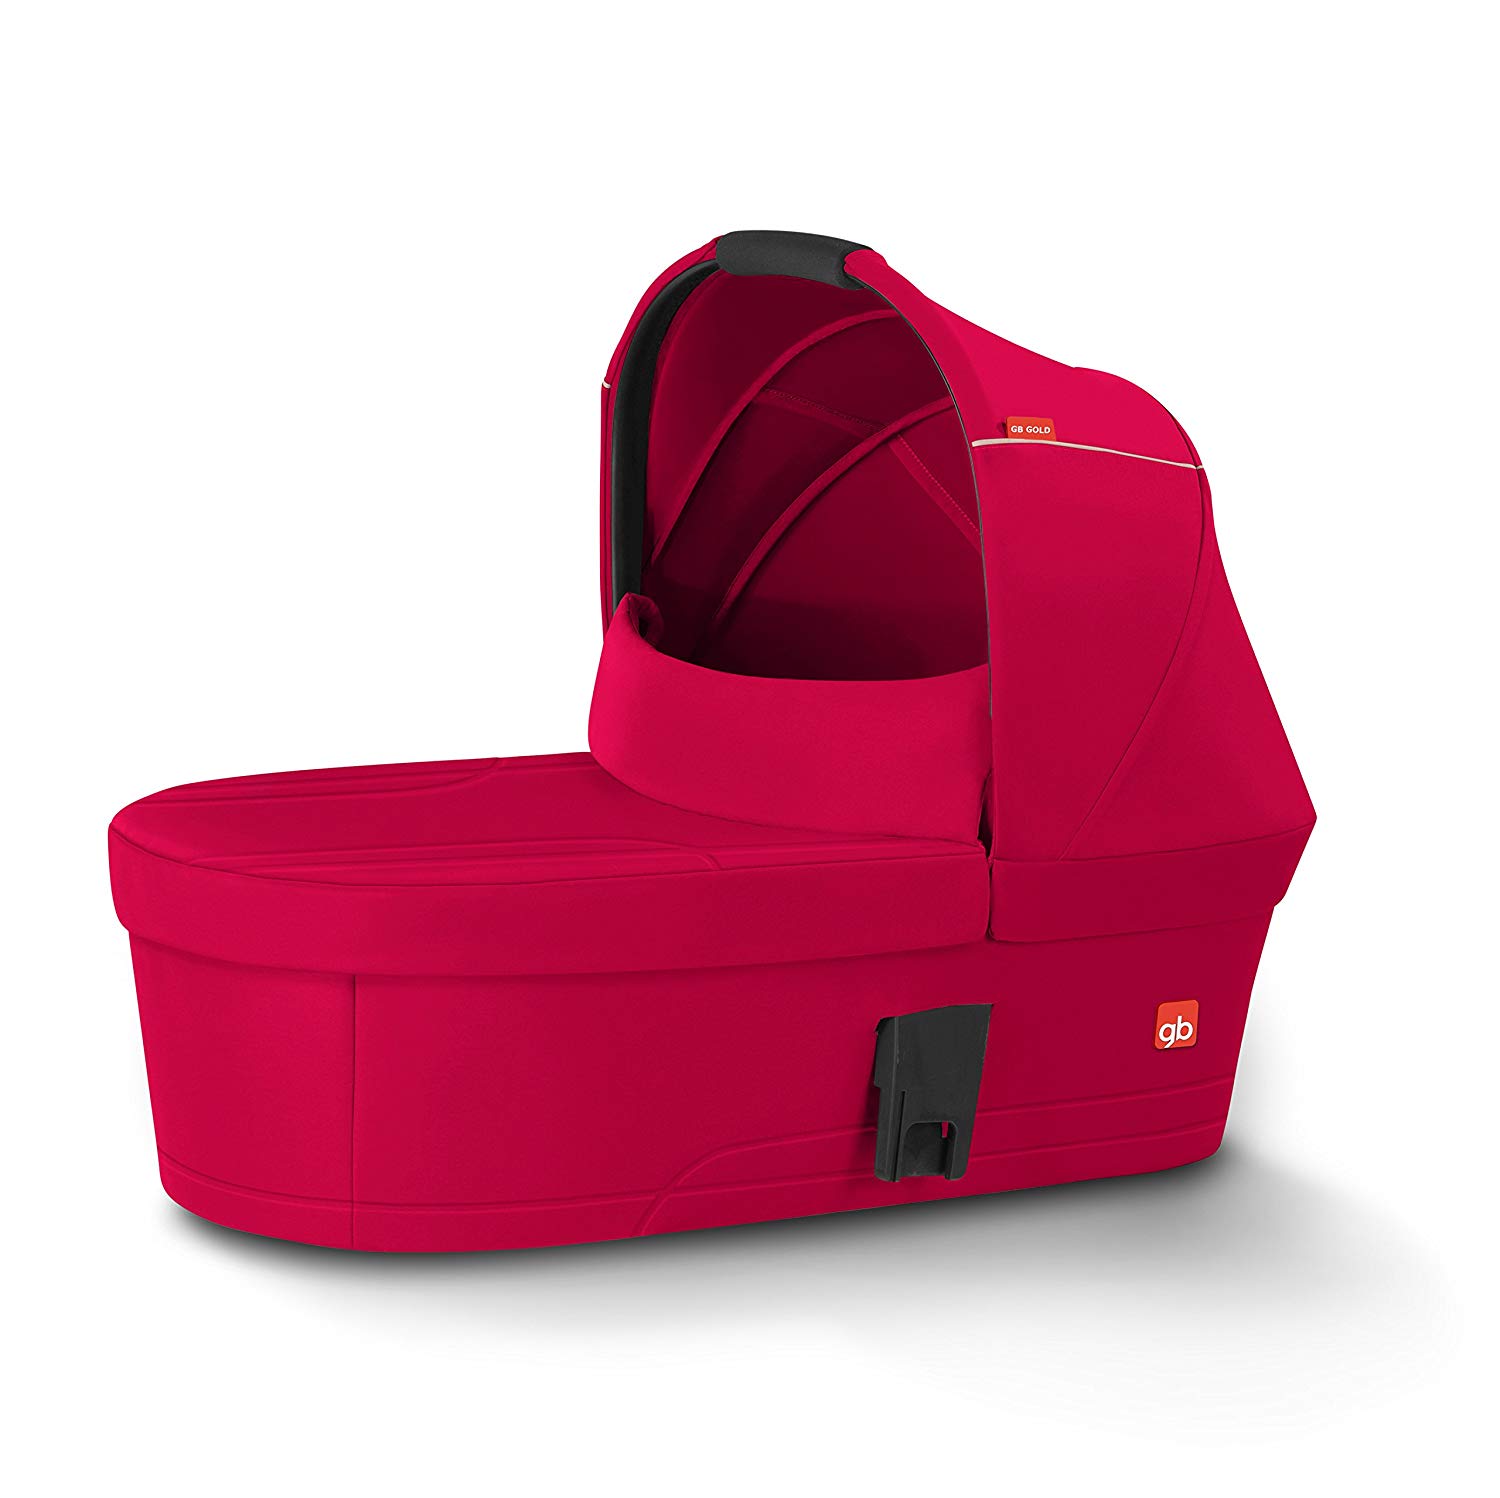 Gb Gold Carrycot, Collection 2018  Cherry Red